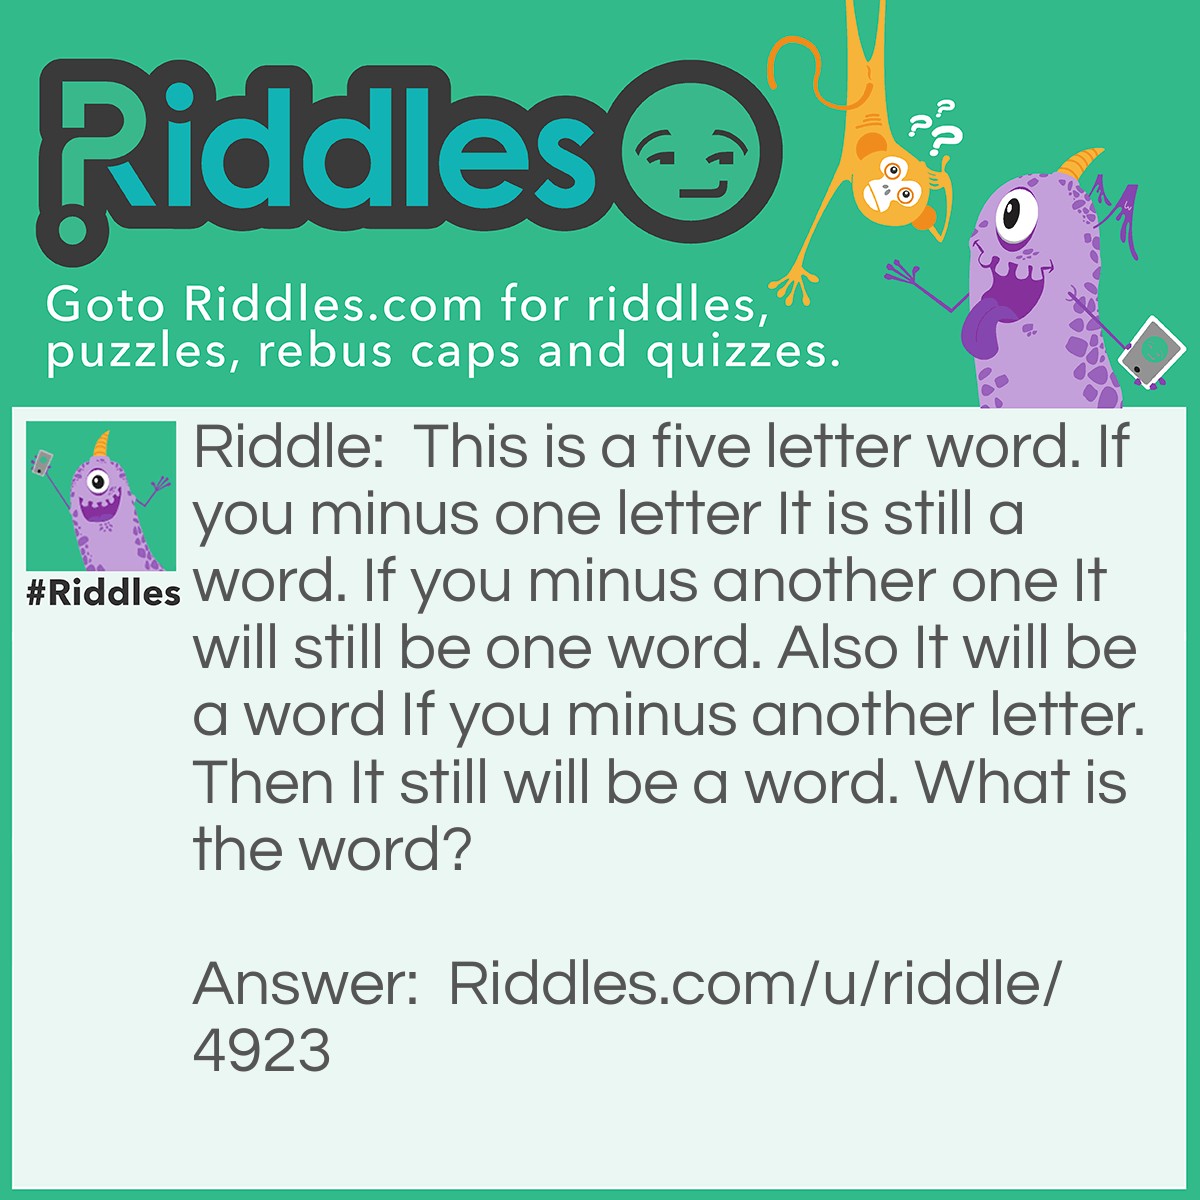 Riddle: This is a five letter word. If you minus one letter It is still a word. If you minus another one It will still be one word. Also It will be a word If you minus another letter. Then It still will be a word. What is the word? Answer: Plant. plant, pant, ant, an or at, a. Or plant, plan, pan, an, a.